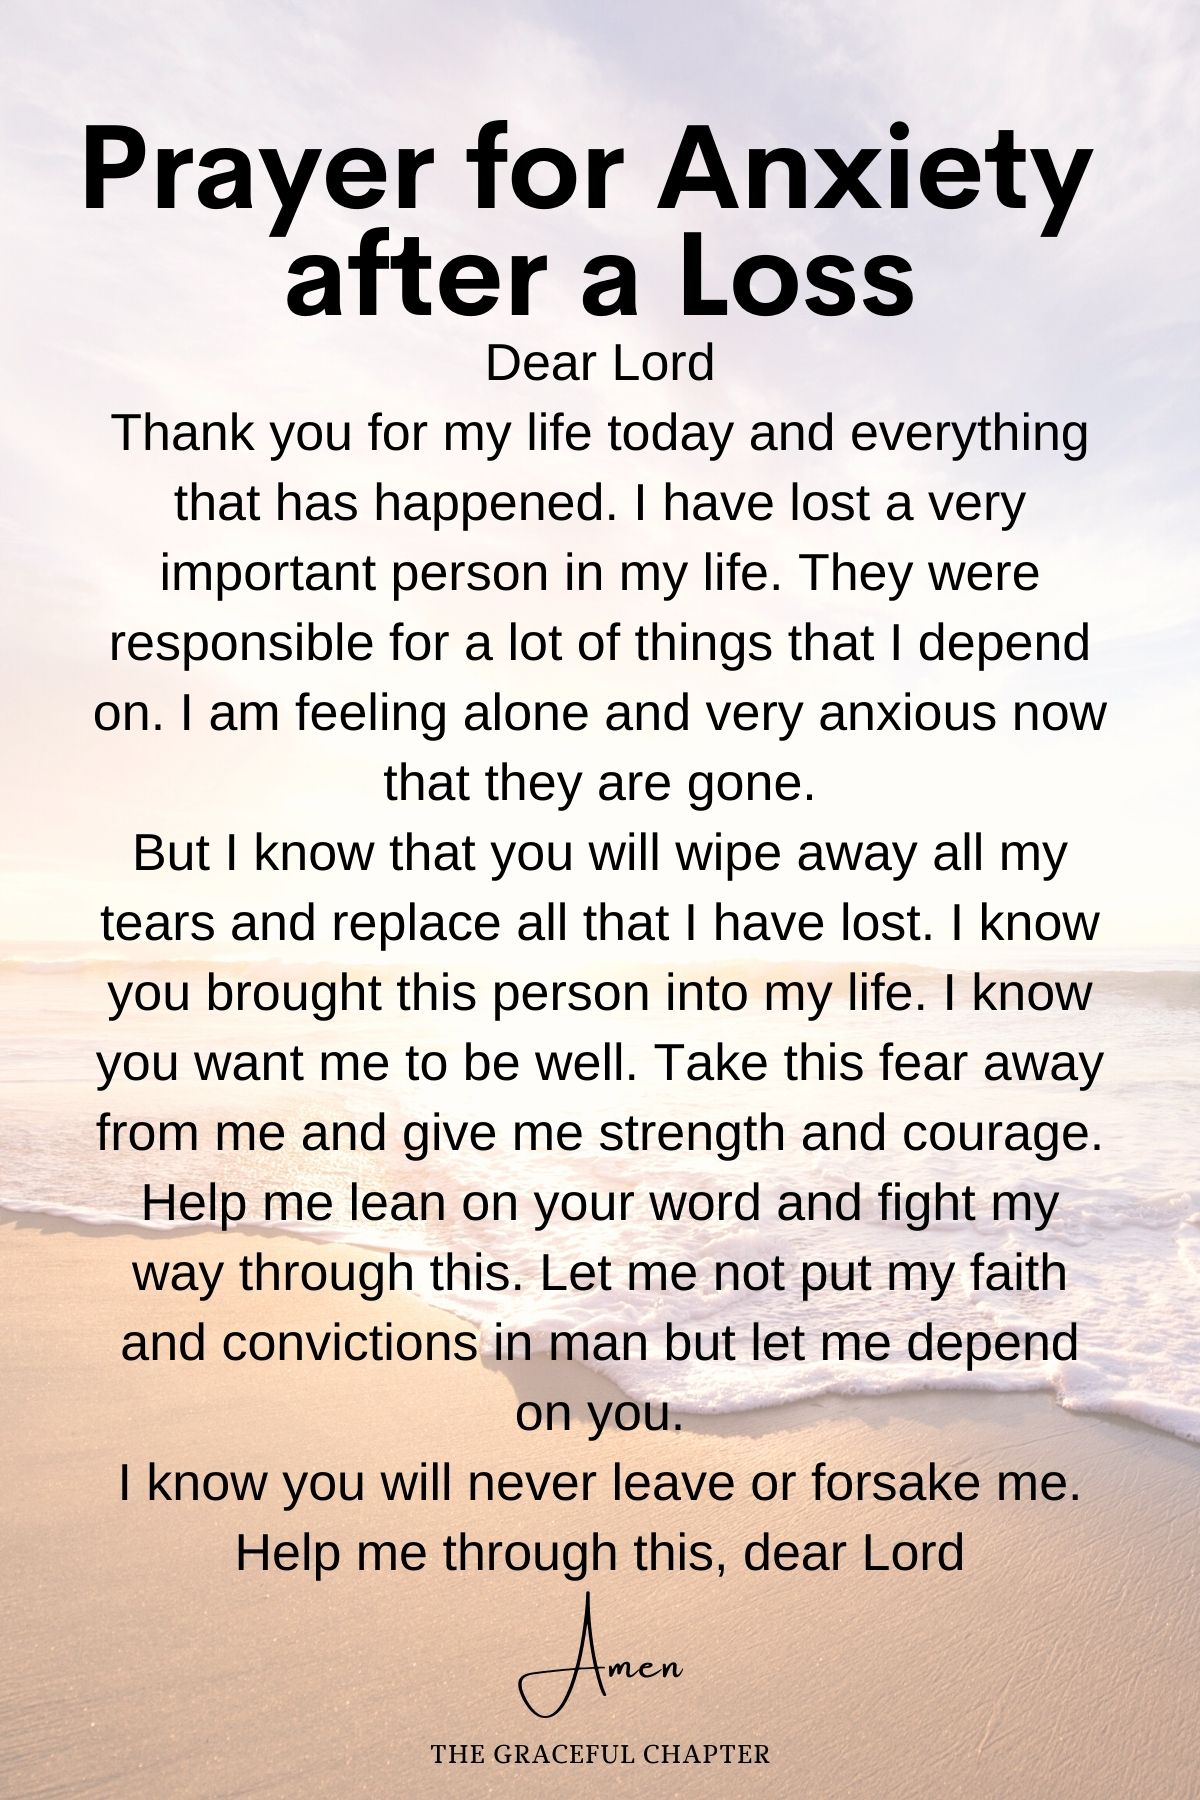 Prayer for Anxiety after a Loss